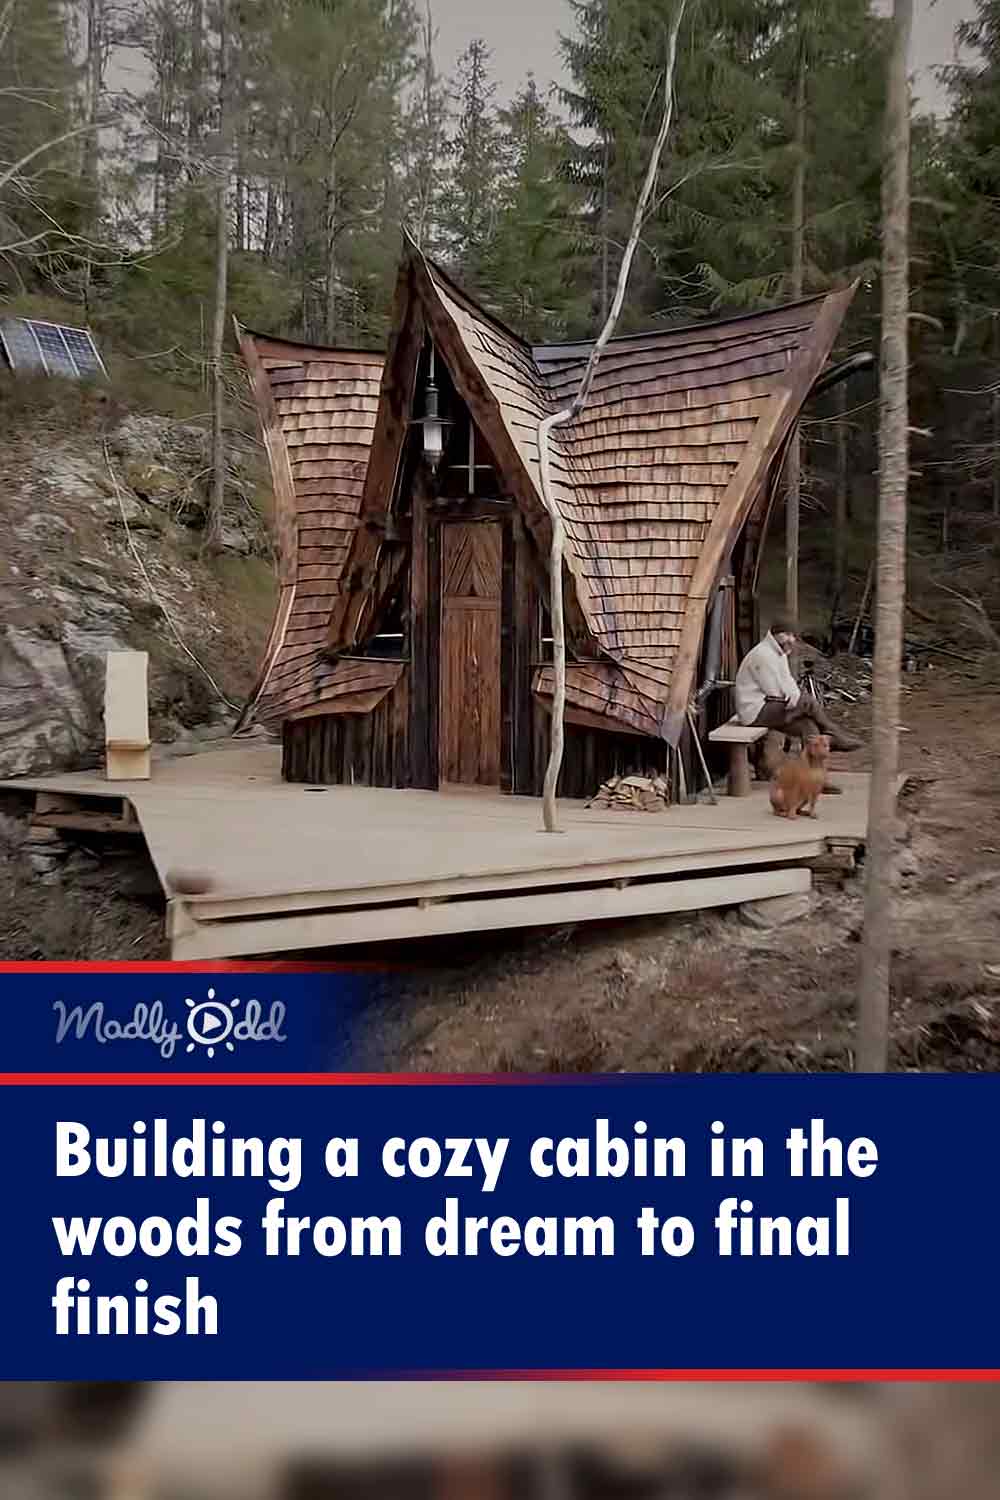 Building a cozy cabin in the woods from dream to final finish